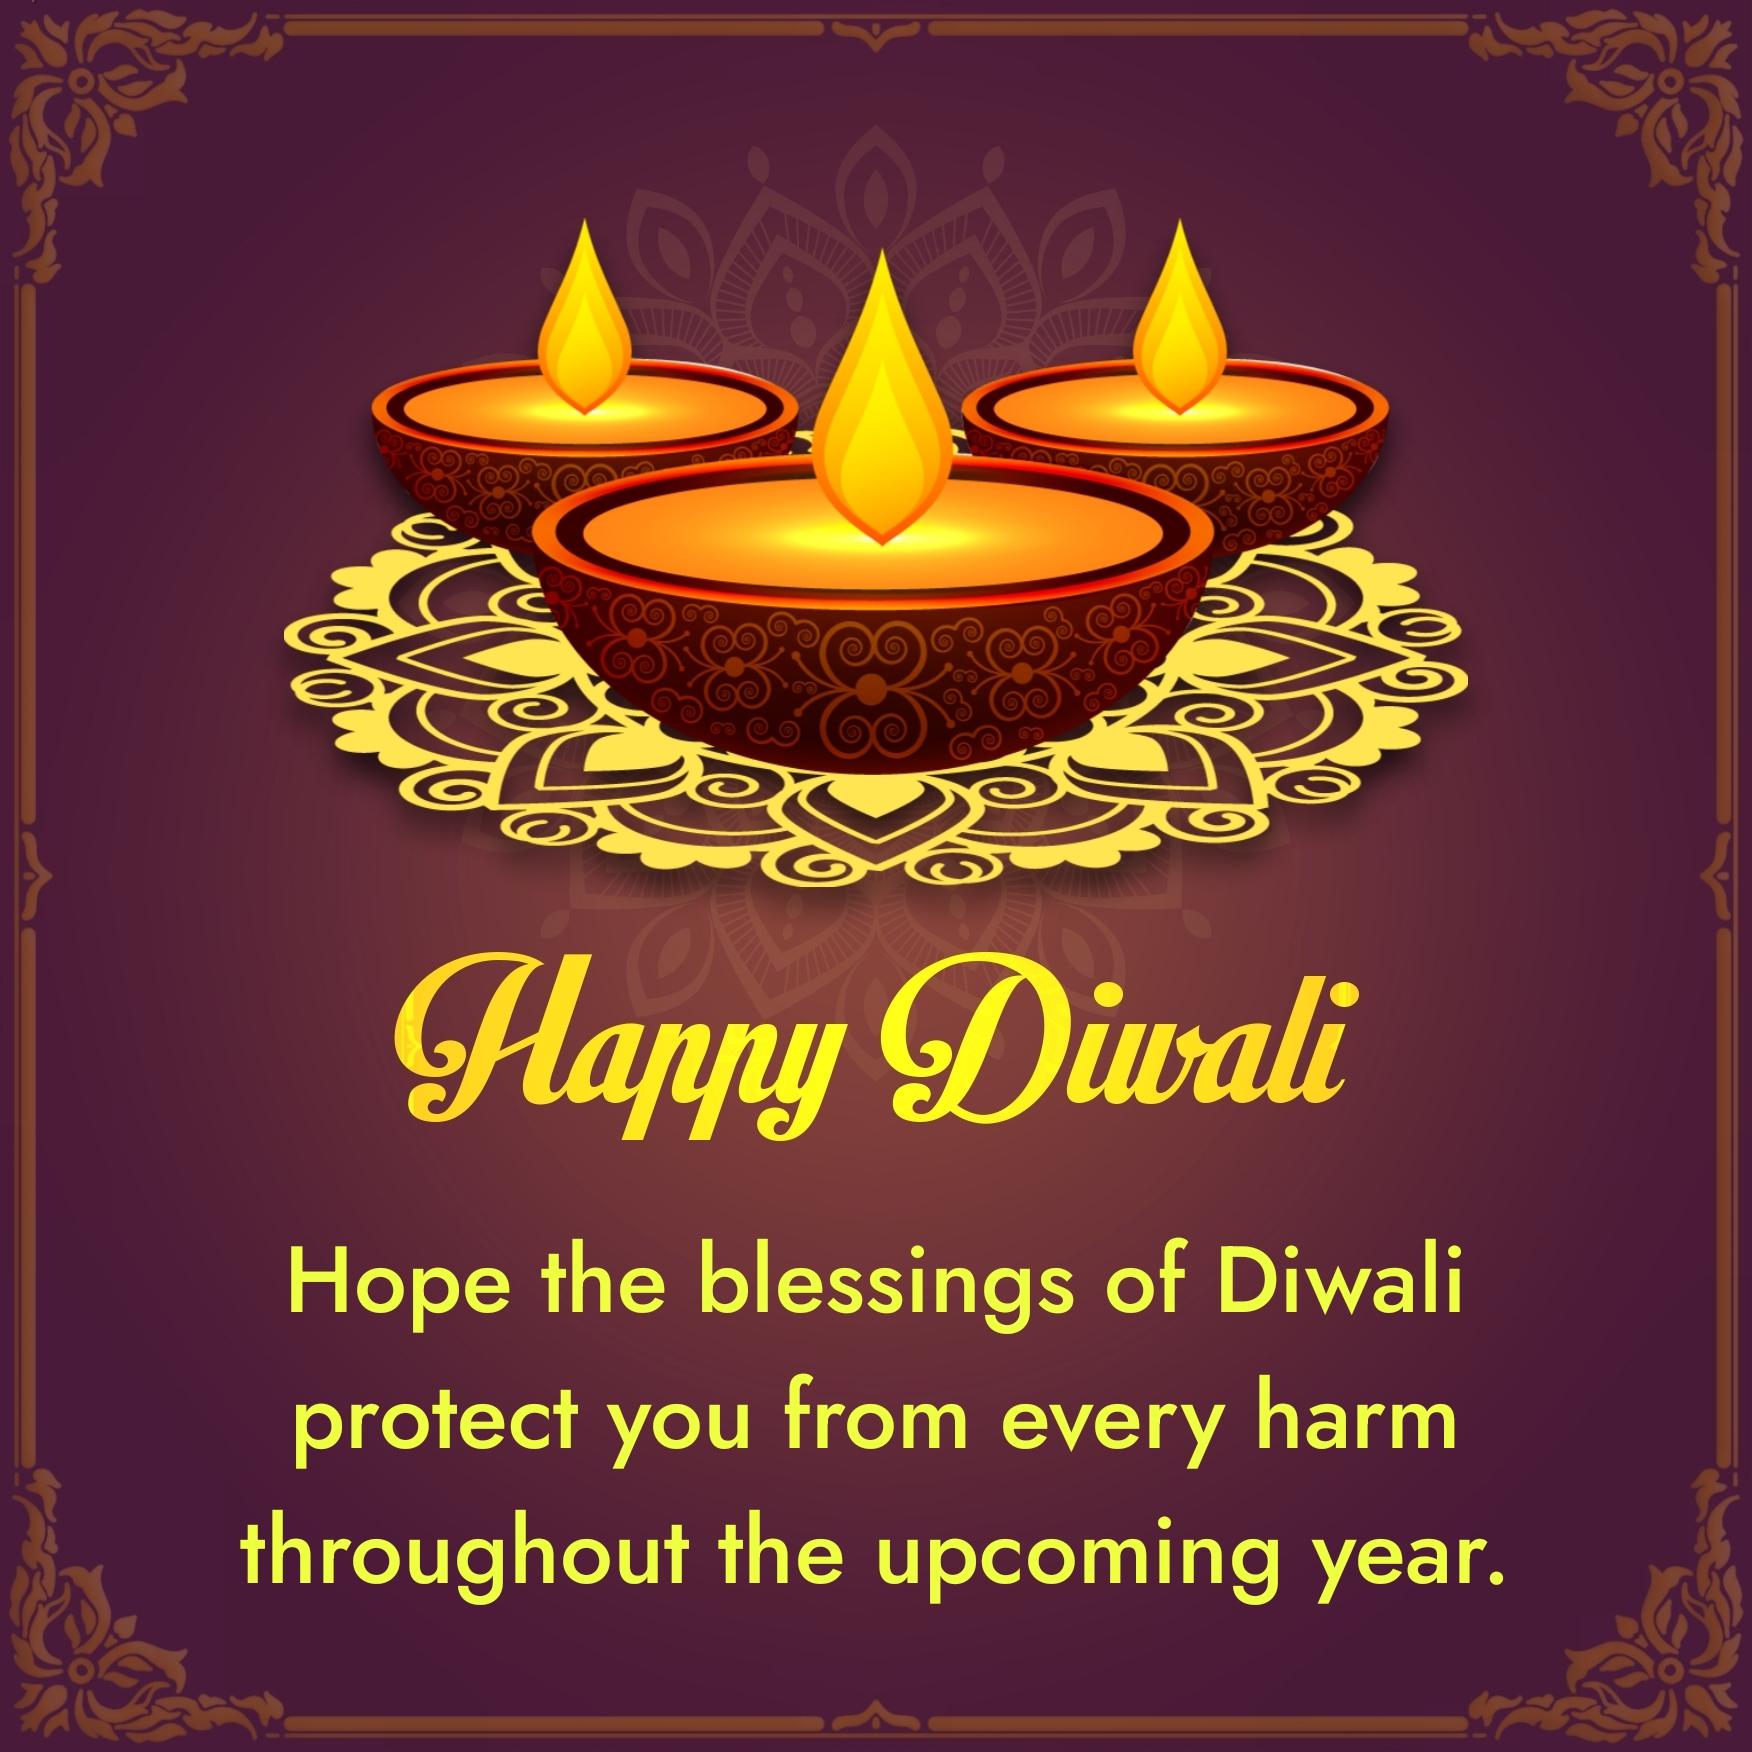 Hope the blessings of Diwali protect you from every harm